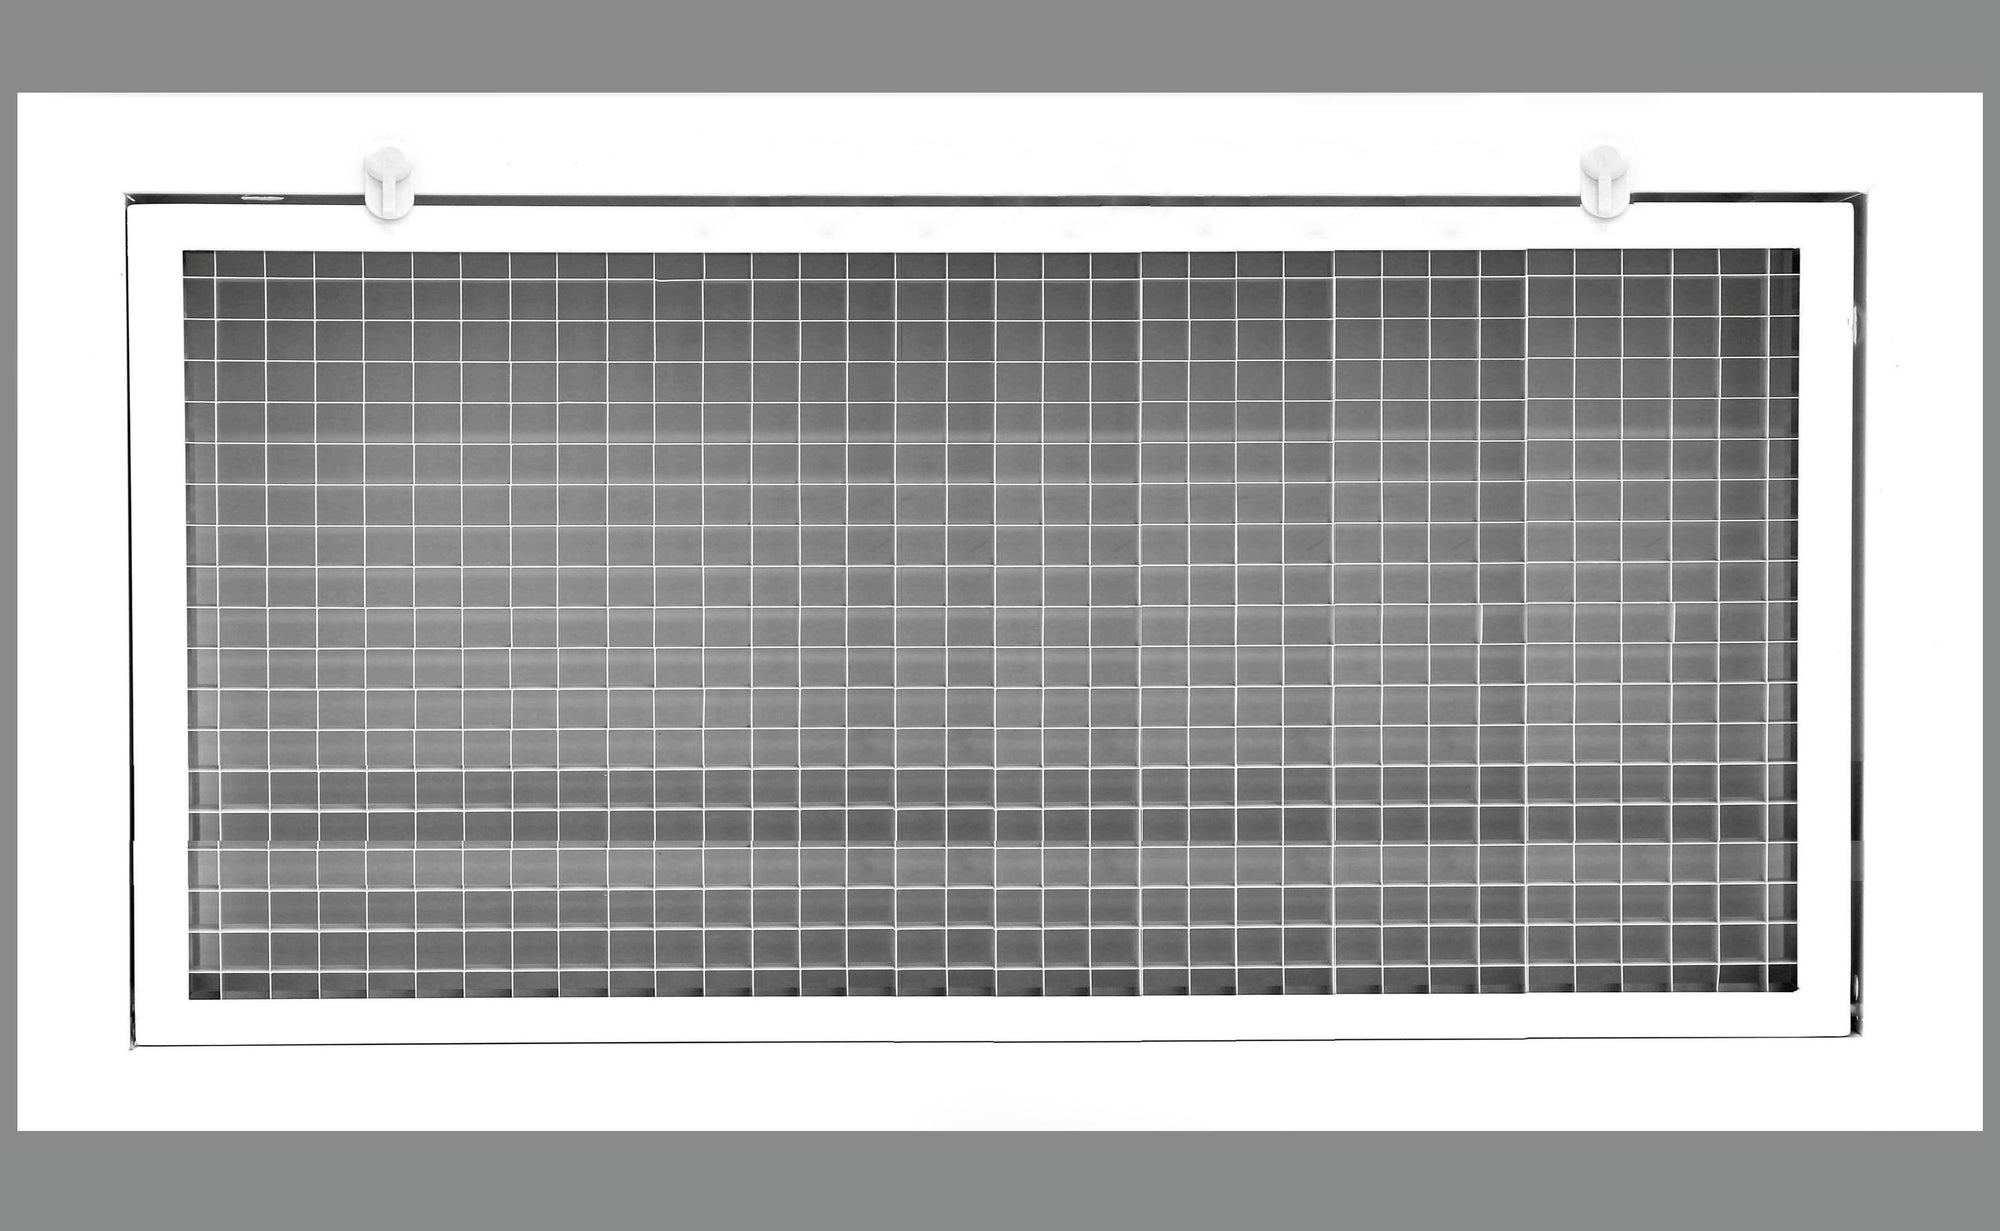 32" x 14" Cube Core Eggcrate Return Air Filter Grille for 1" Filter